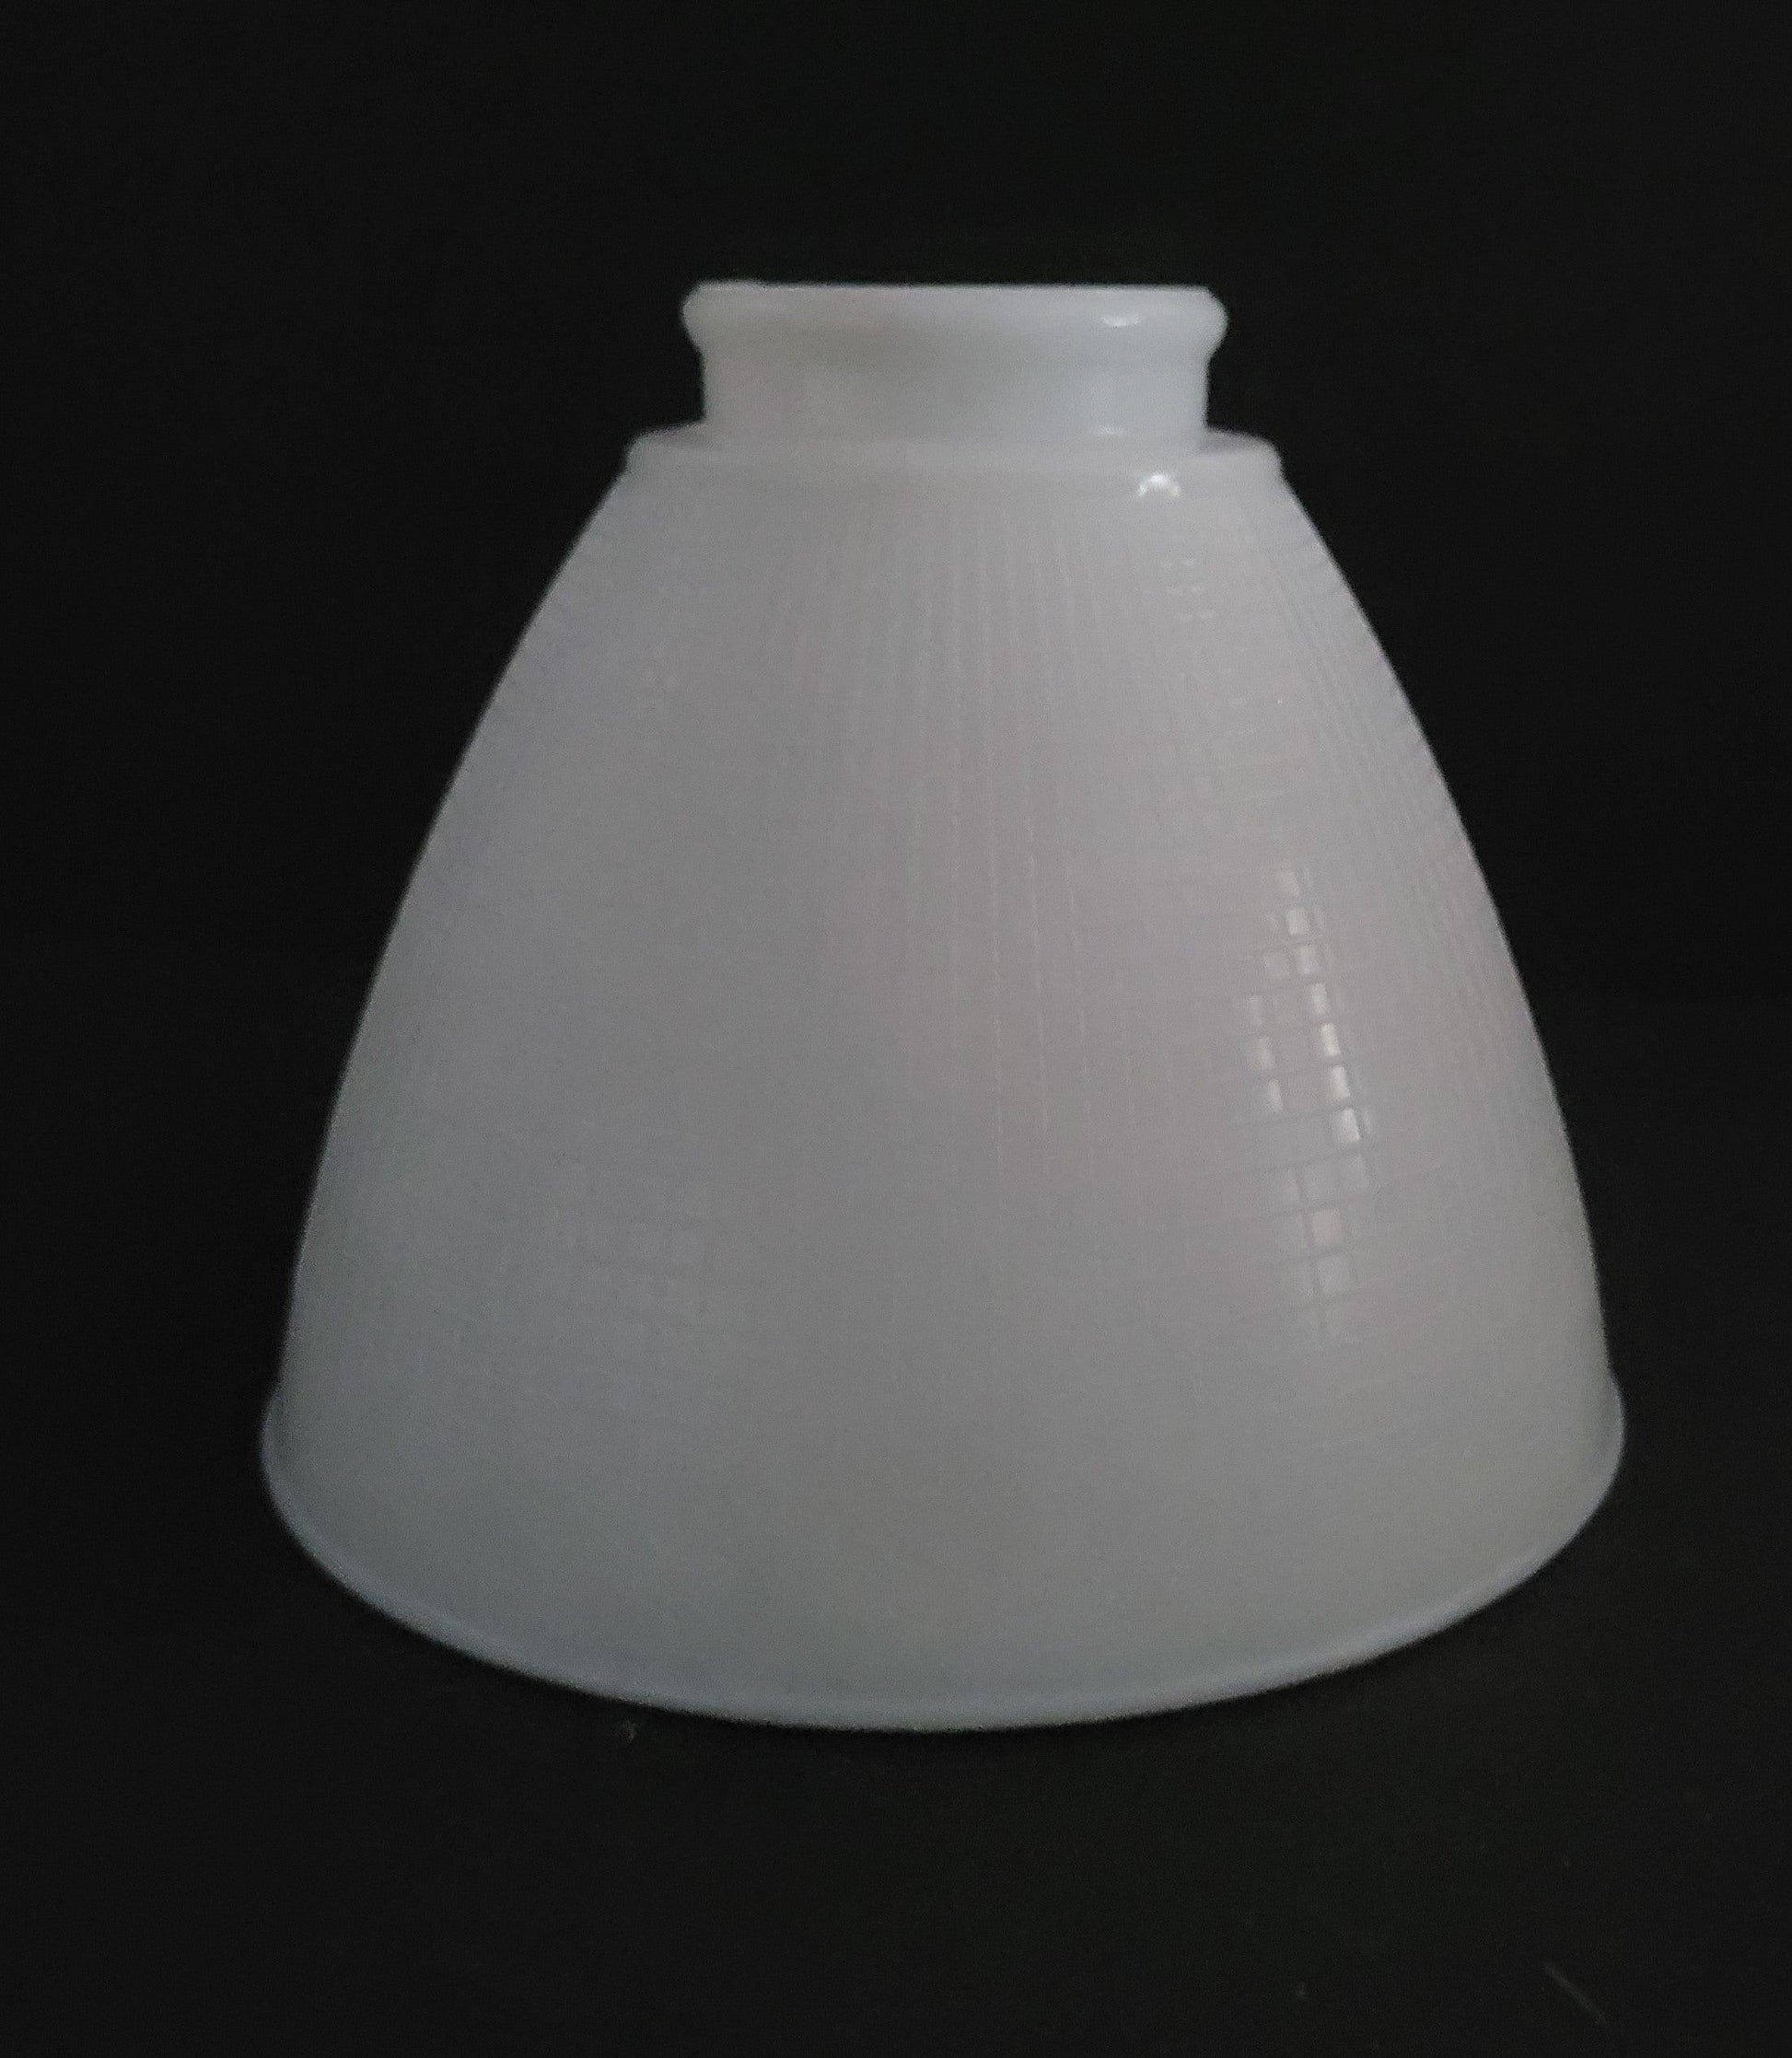 61270 Six Inch Opal Glass Diffuser Lamp Shades - Specialty Shades